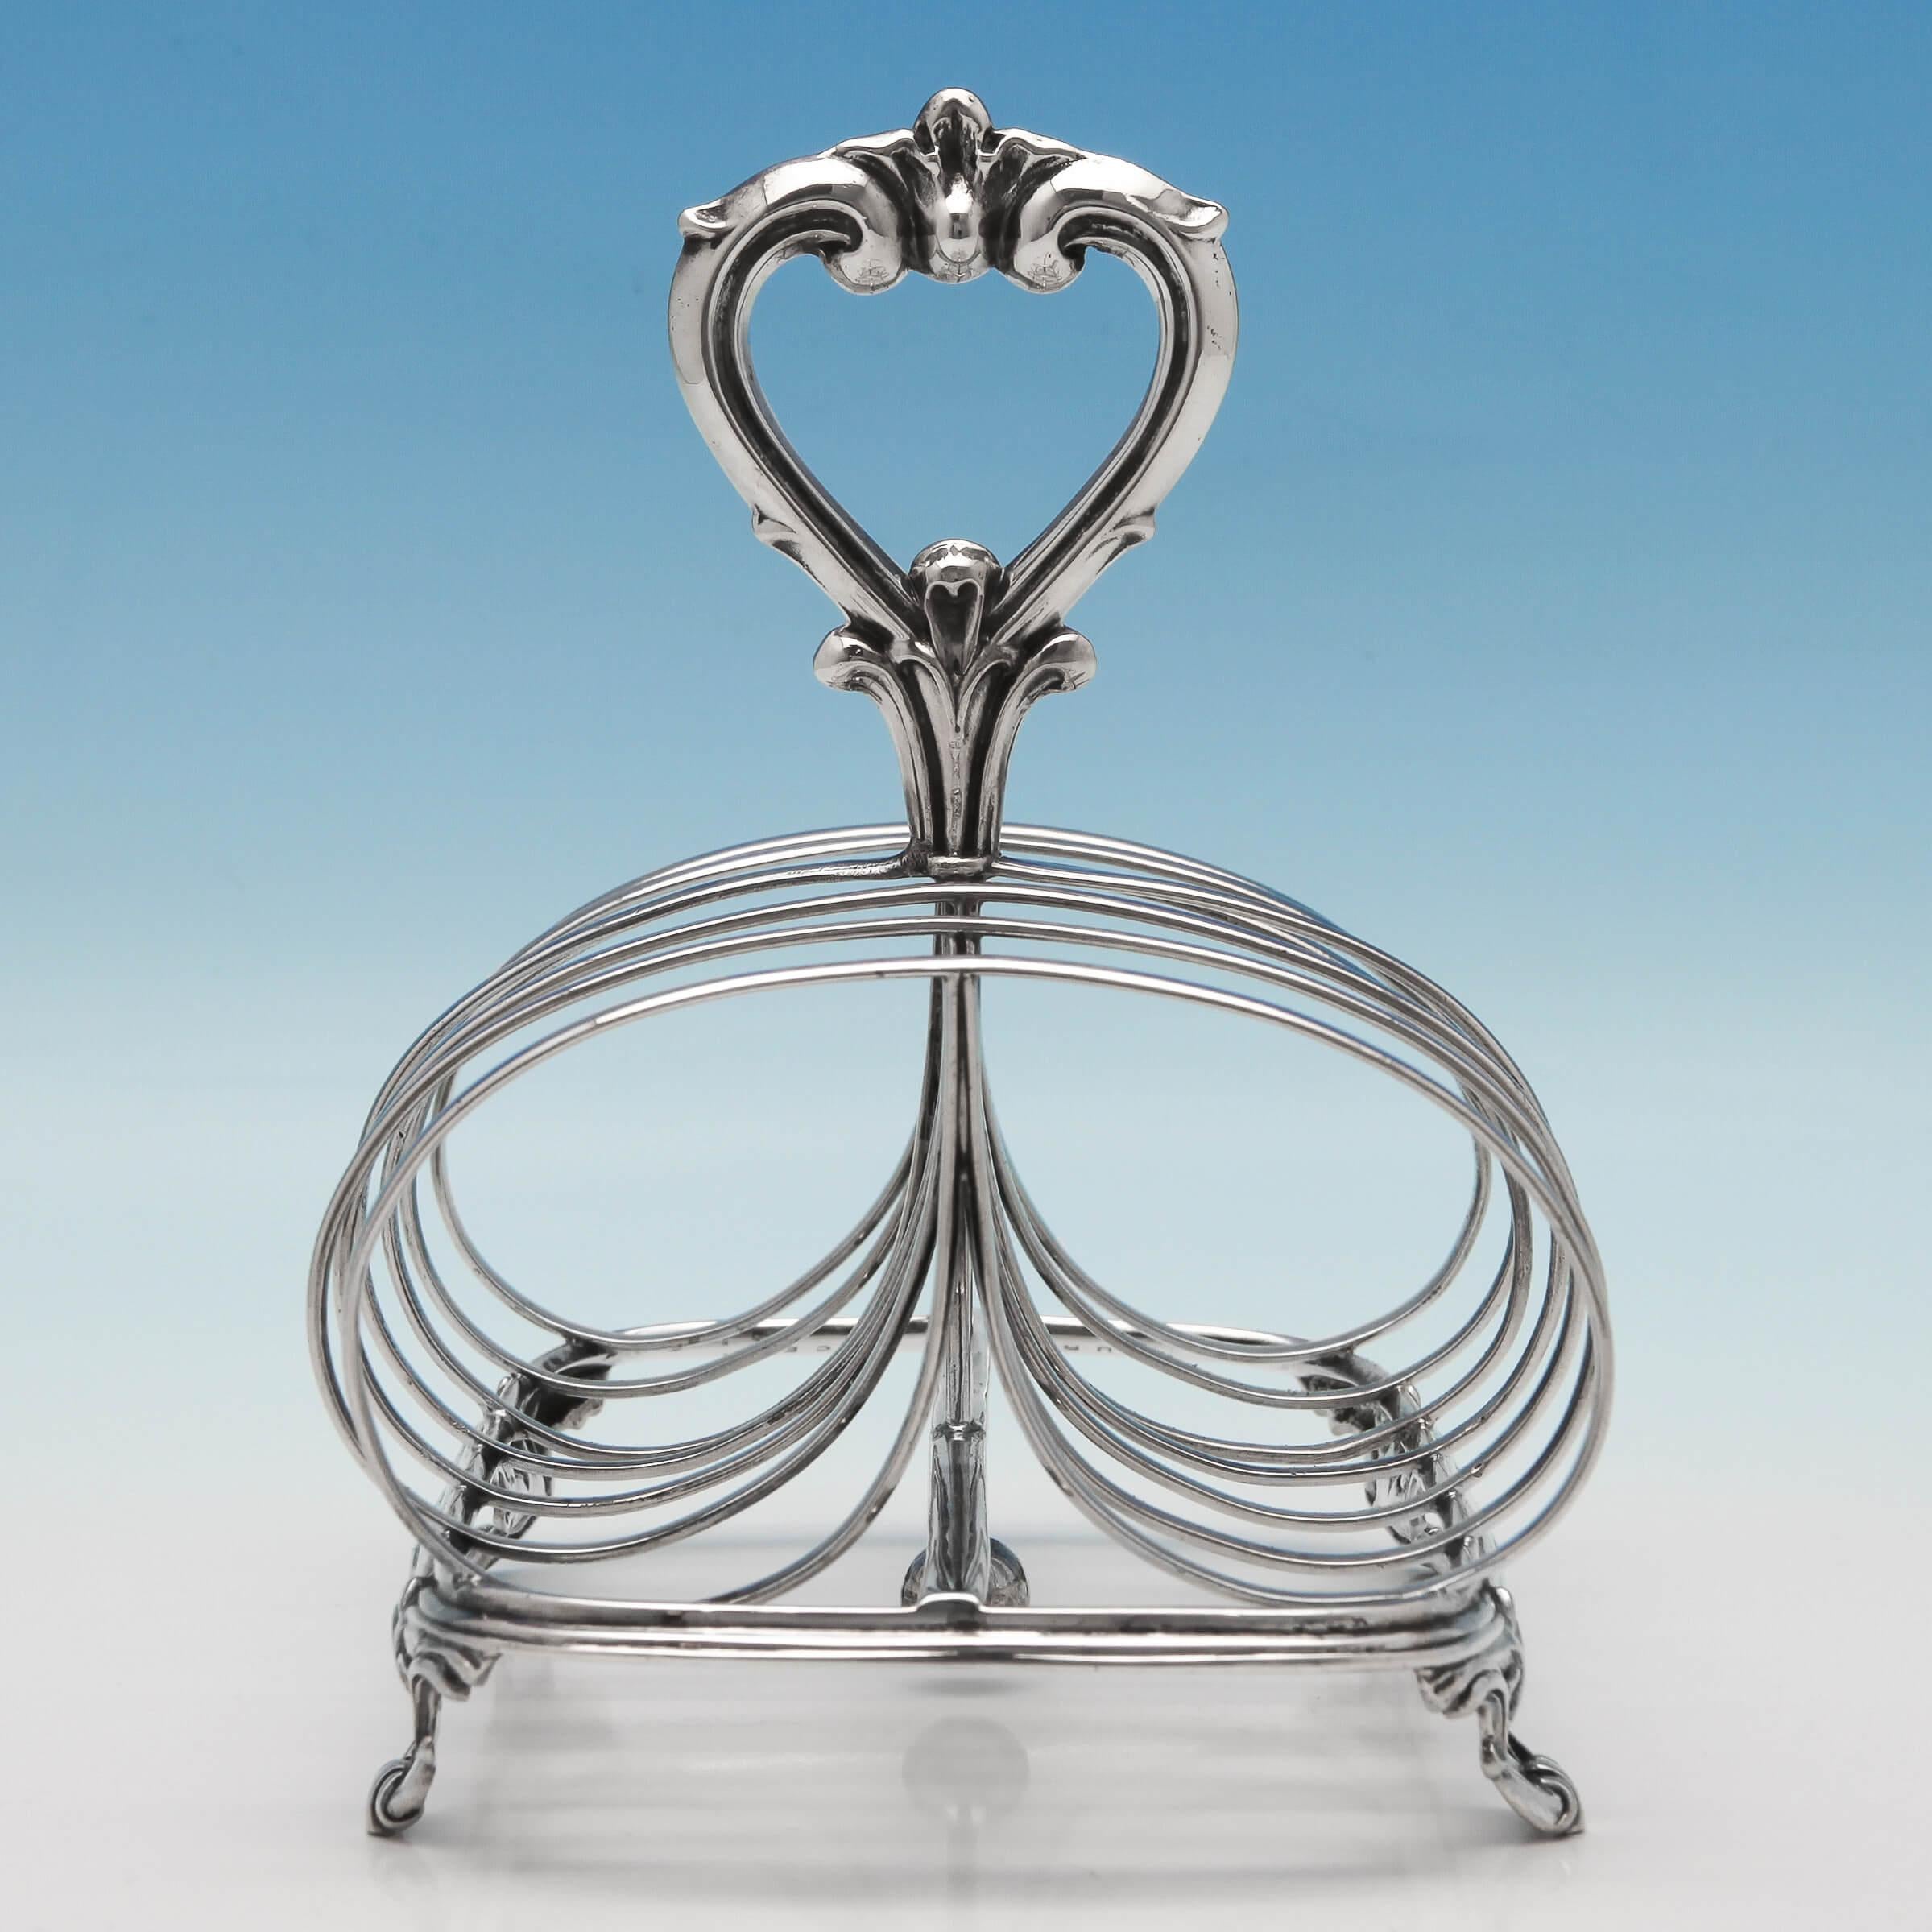 Hallmarked in London in 1874 by William Evans, this fine, Victorian, Antique, Sterling Silver Toast Rack has wide, loop slots, a decorative scroll handle and cast, scroll feet. The toast rack measures 5.5